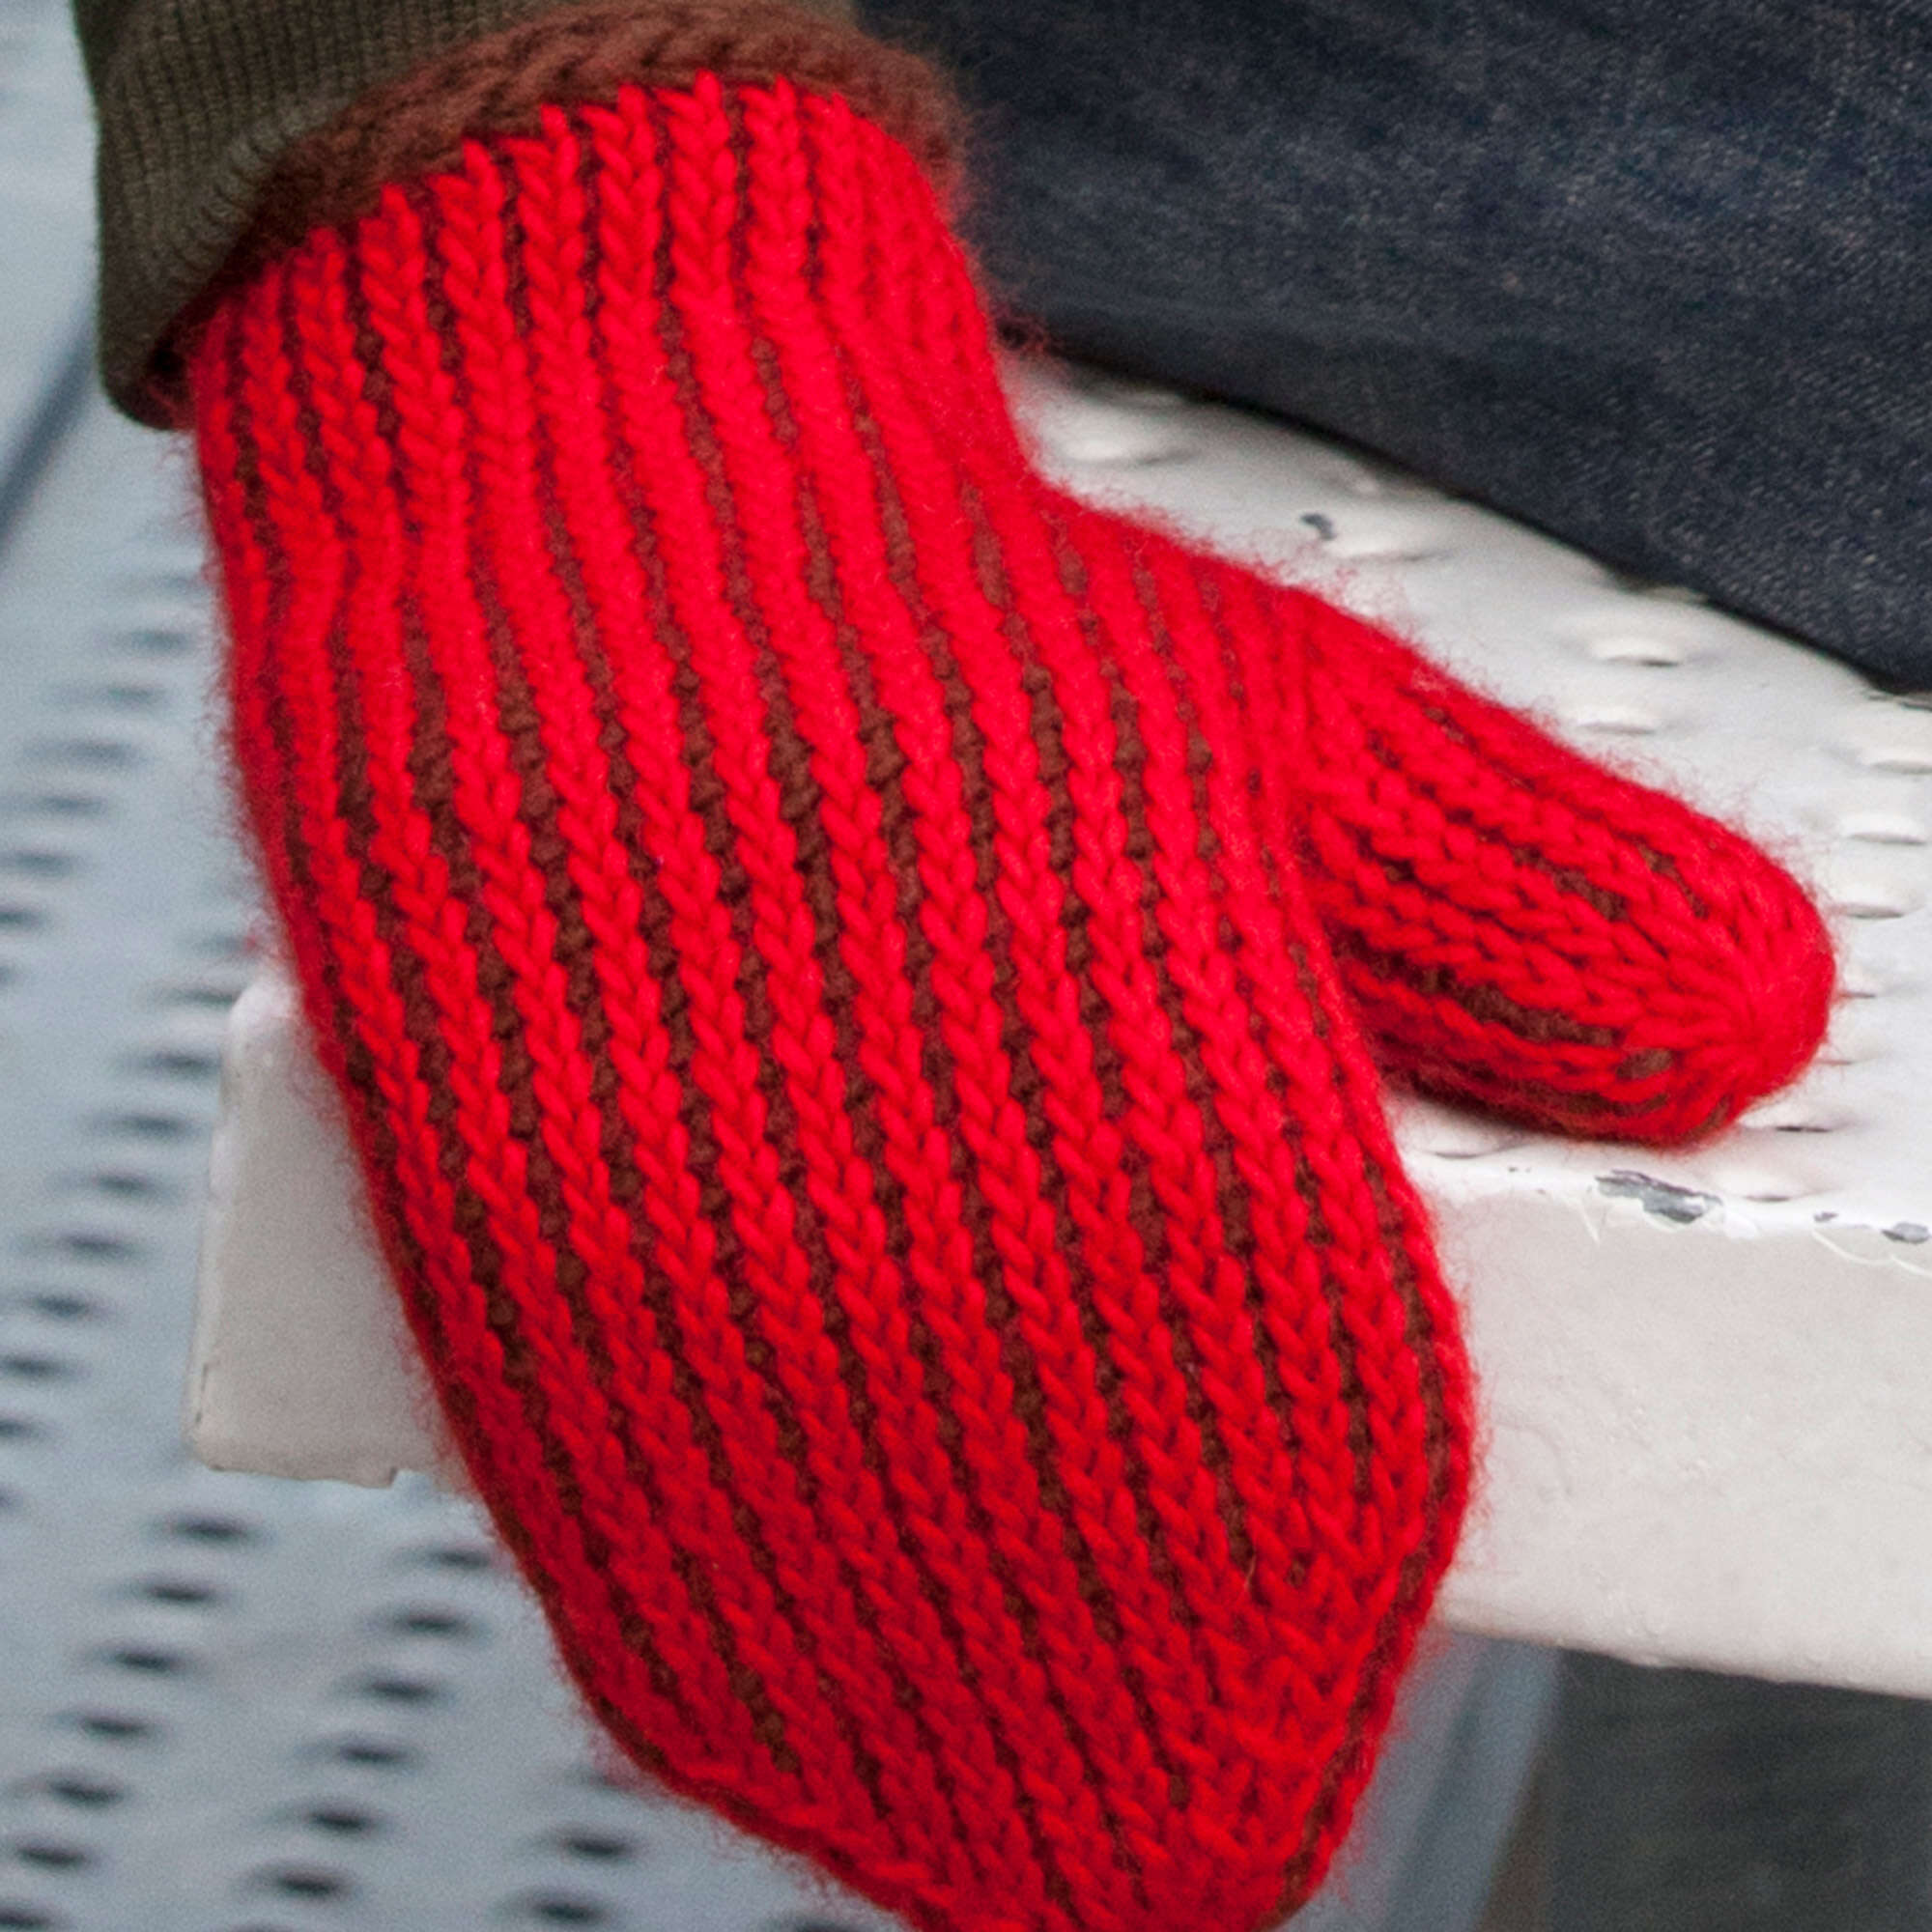 Red Heart Tunisian "In The Round" Mittens | Yarnspirations